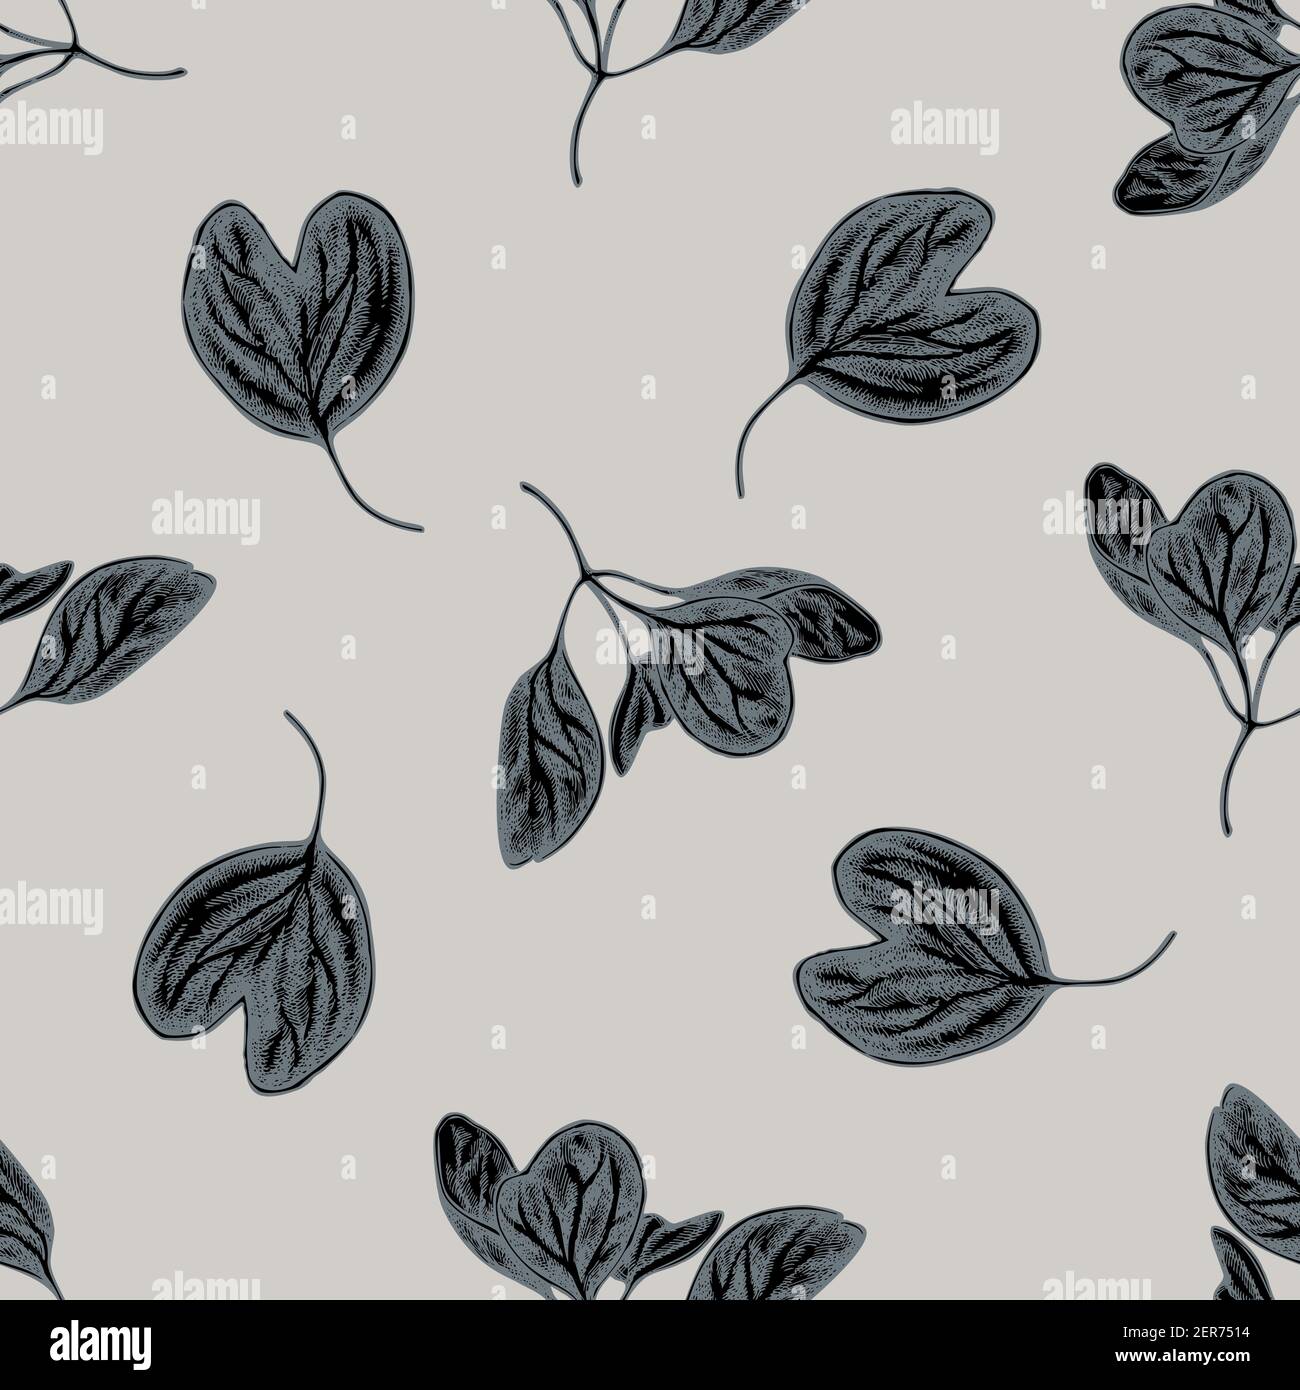 Seamless pattern with hand drawn stylized iresine Stock Vector